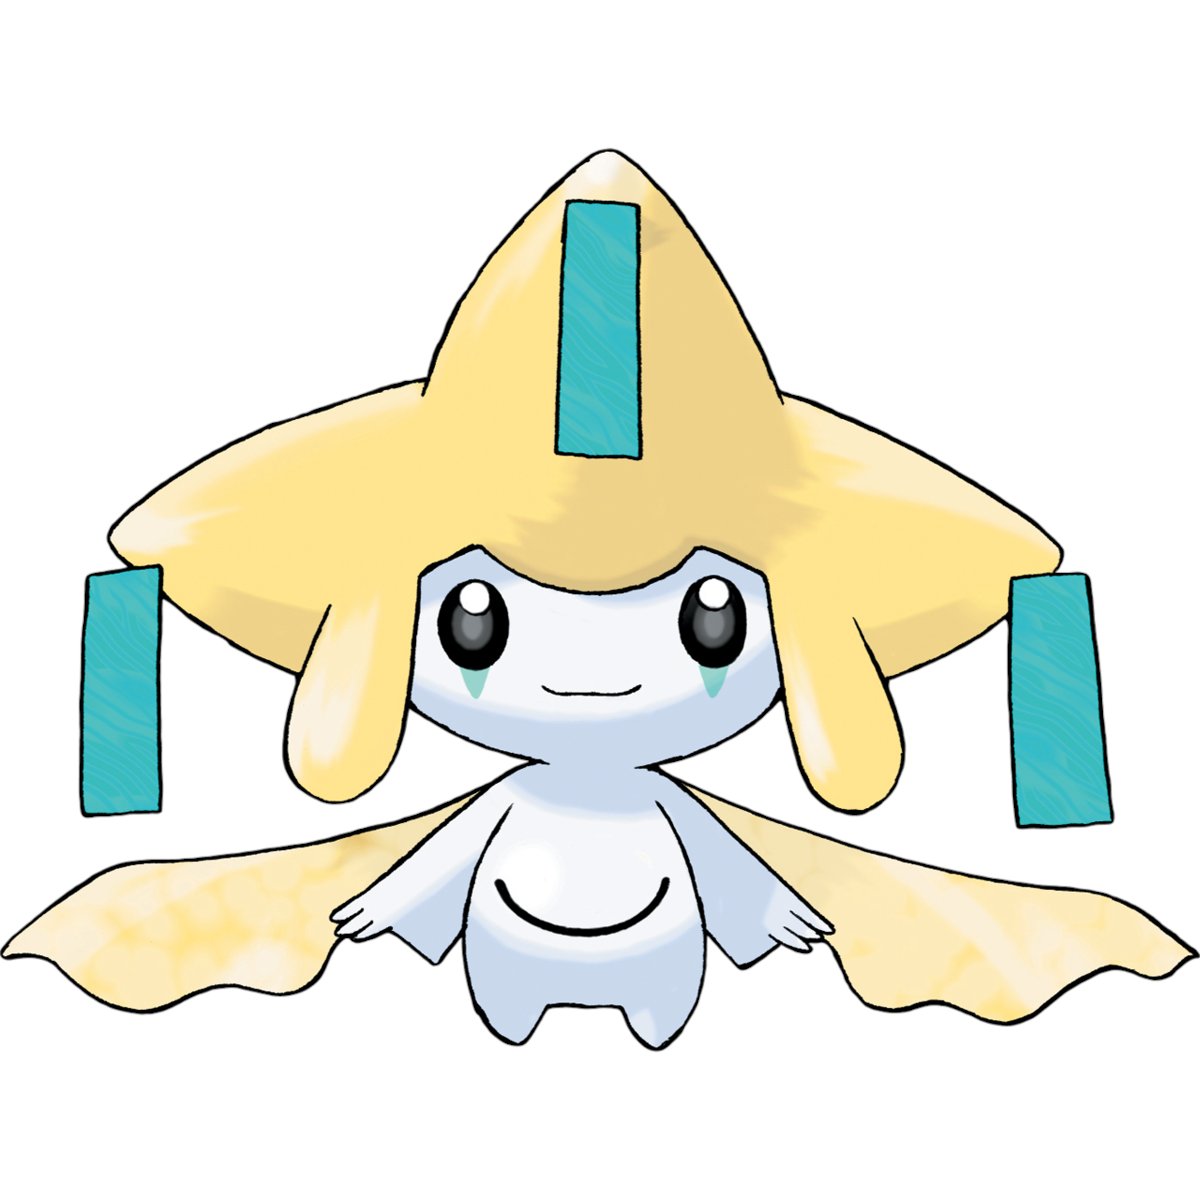 2) jirachi - literally just wish the lions were gone and boom